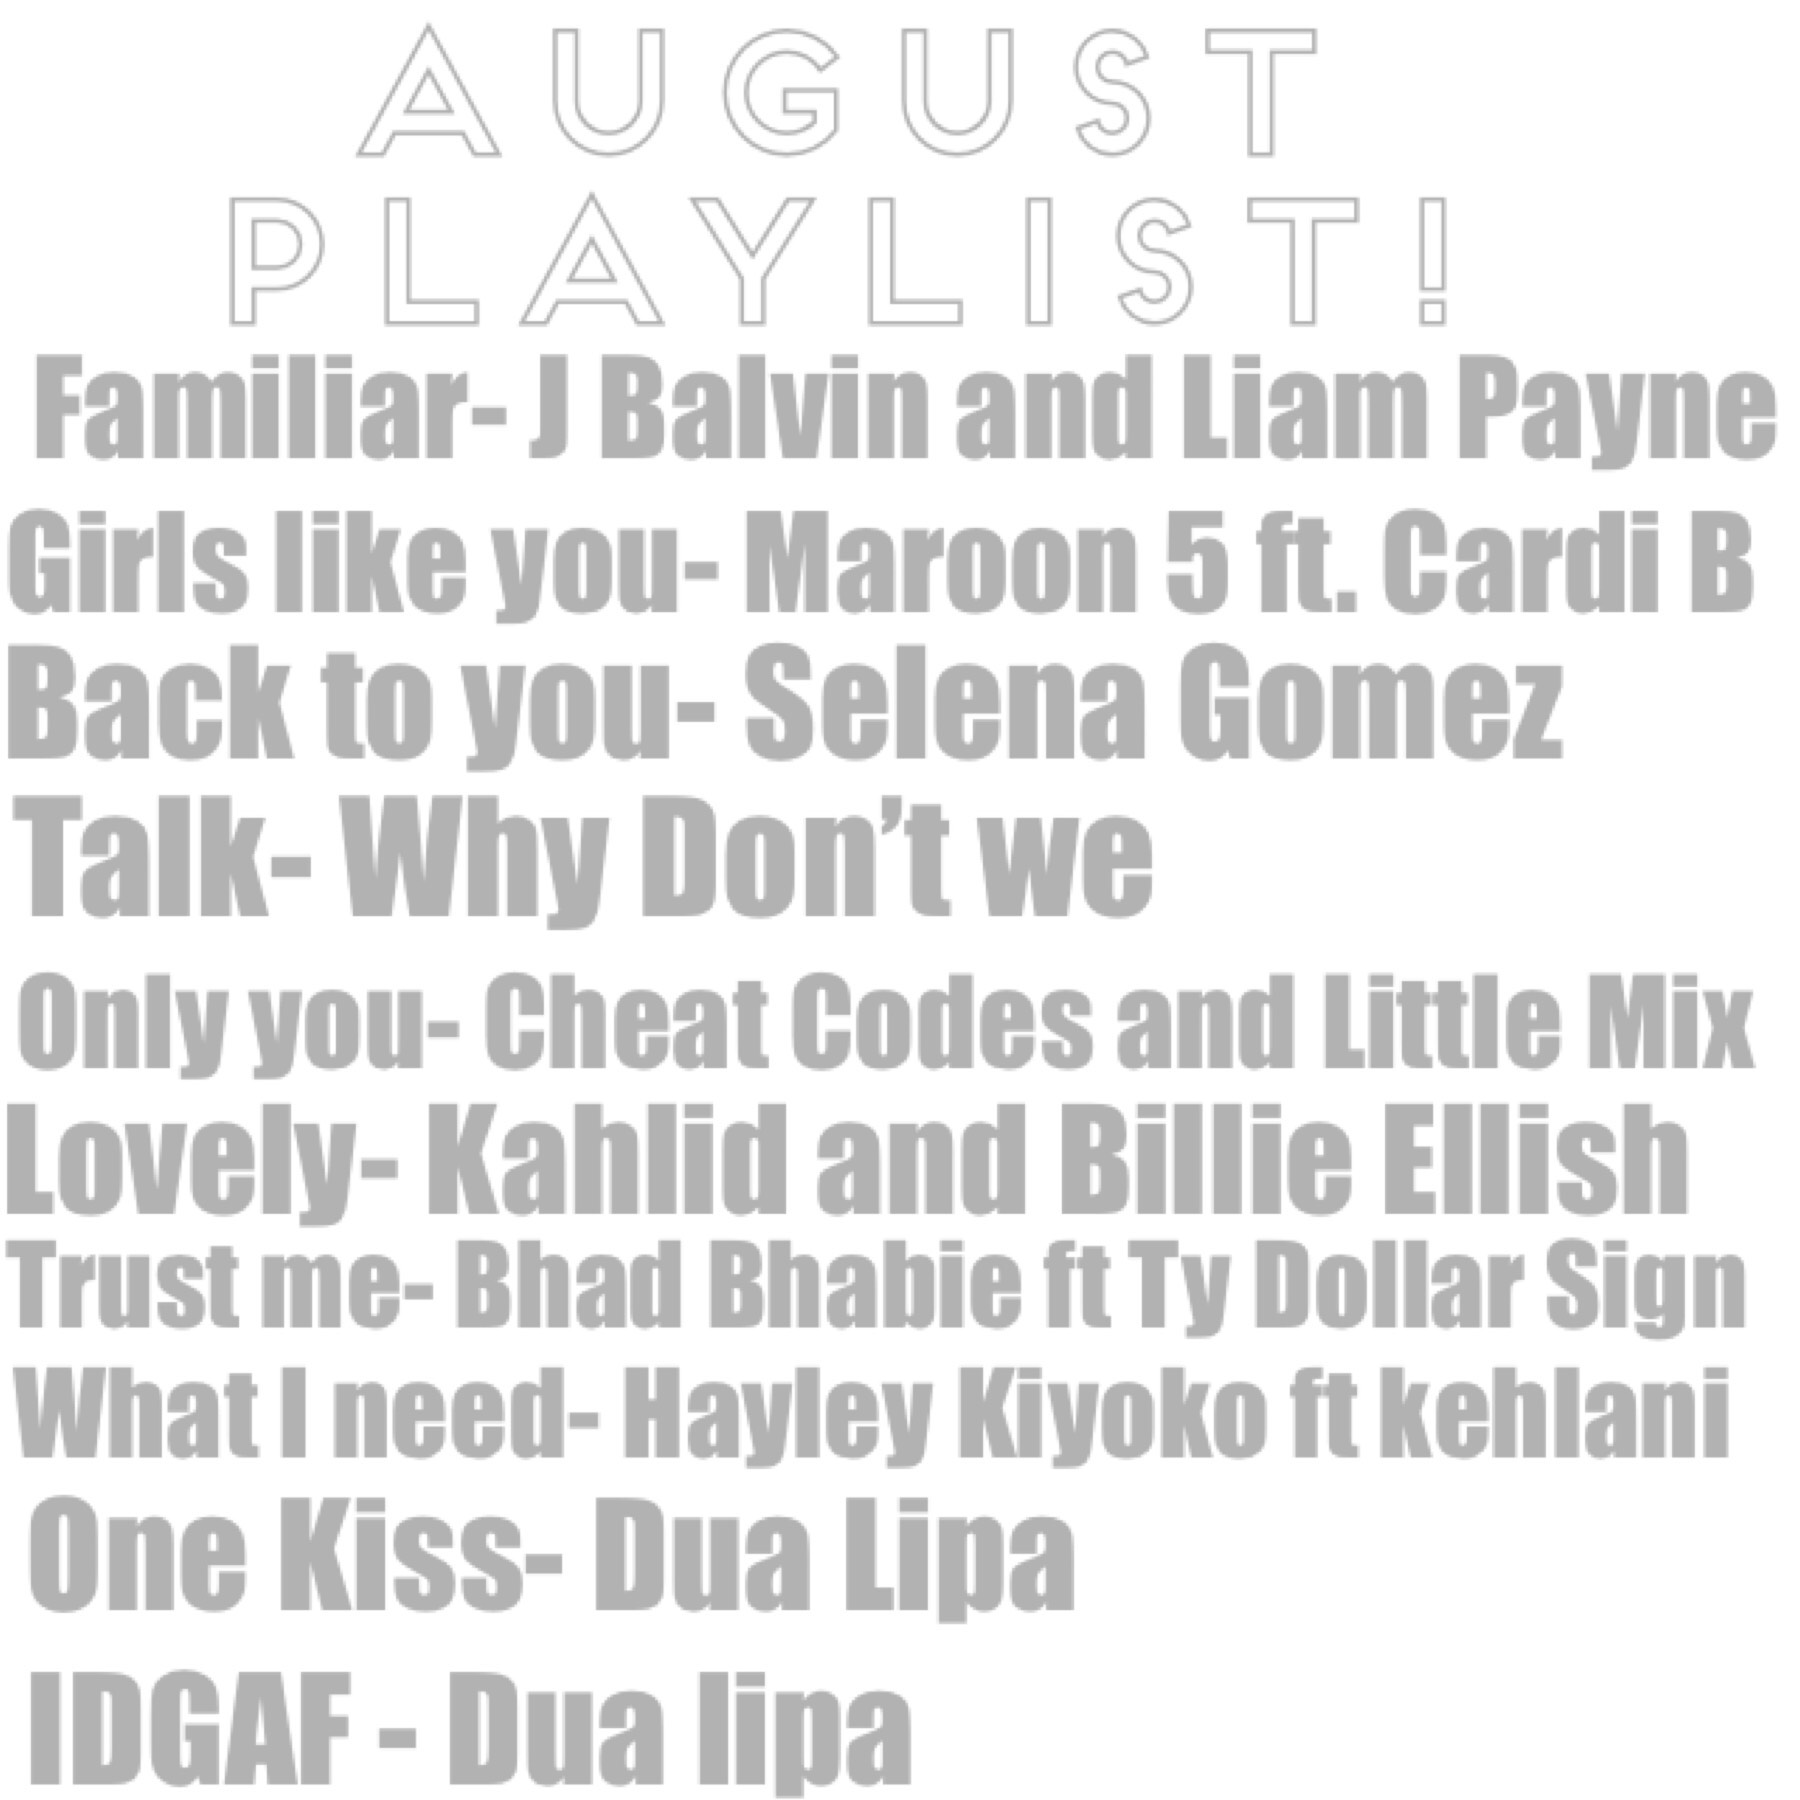 August Playlist (obvi every Wdw song but)